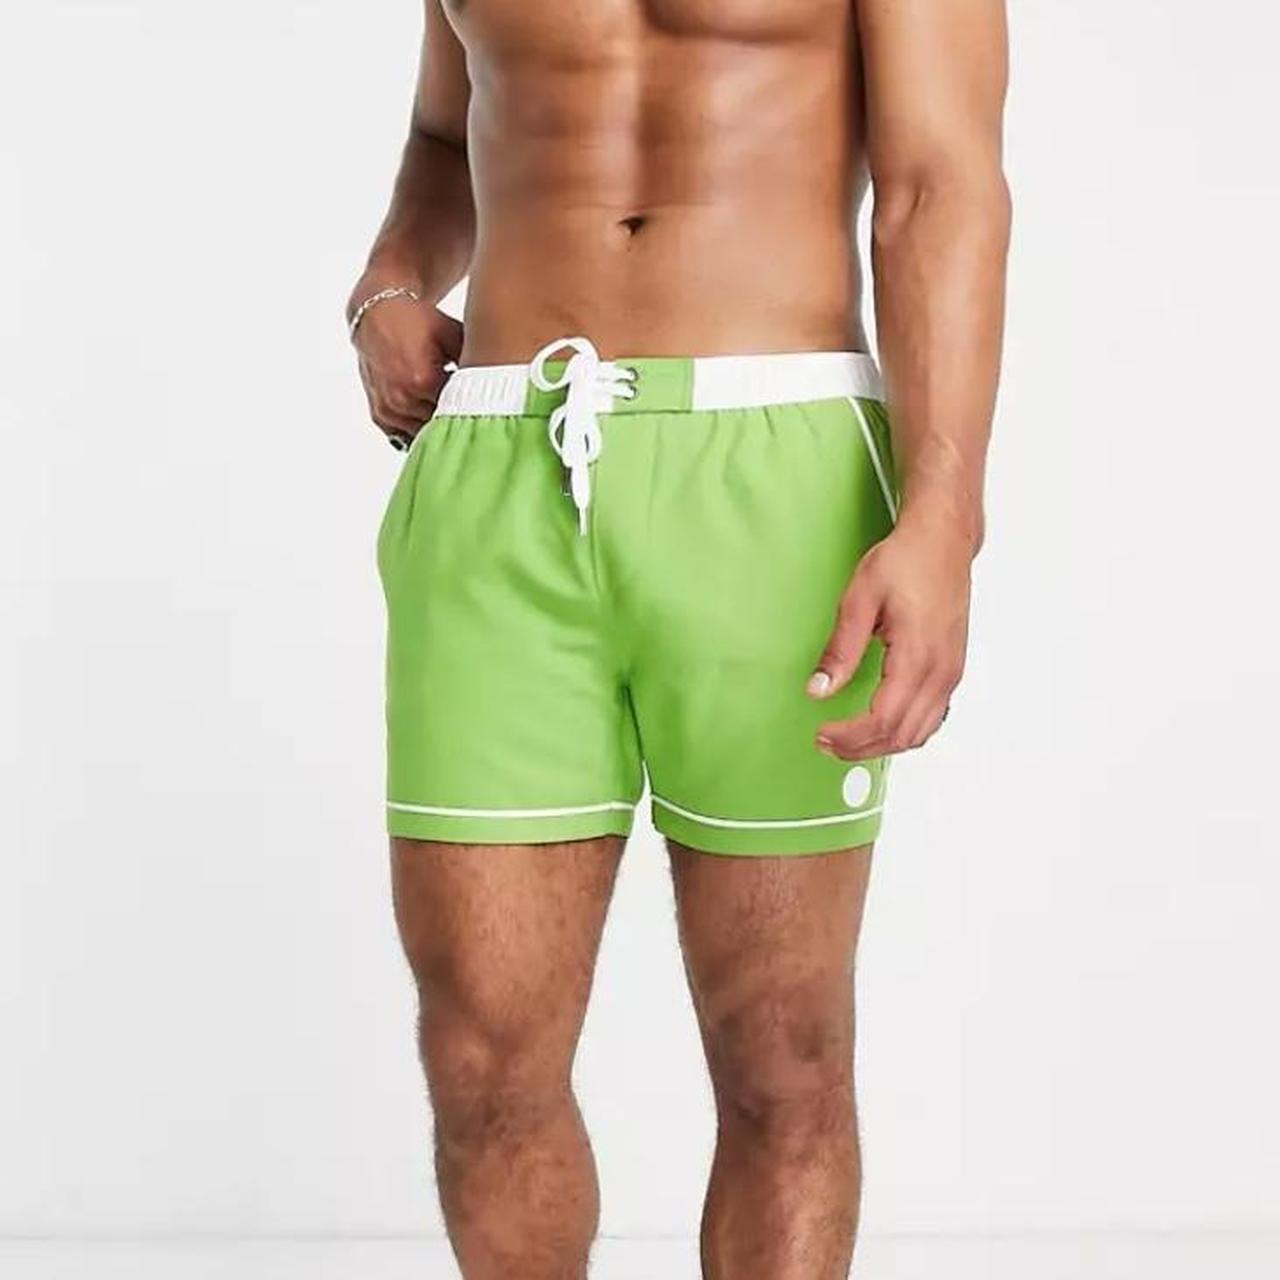 Native Youth Men's Green and White Swim-briefs-shorts (3)